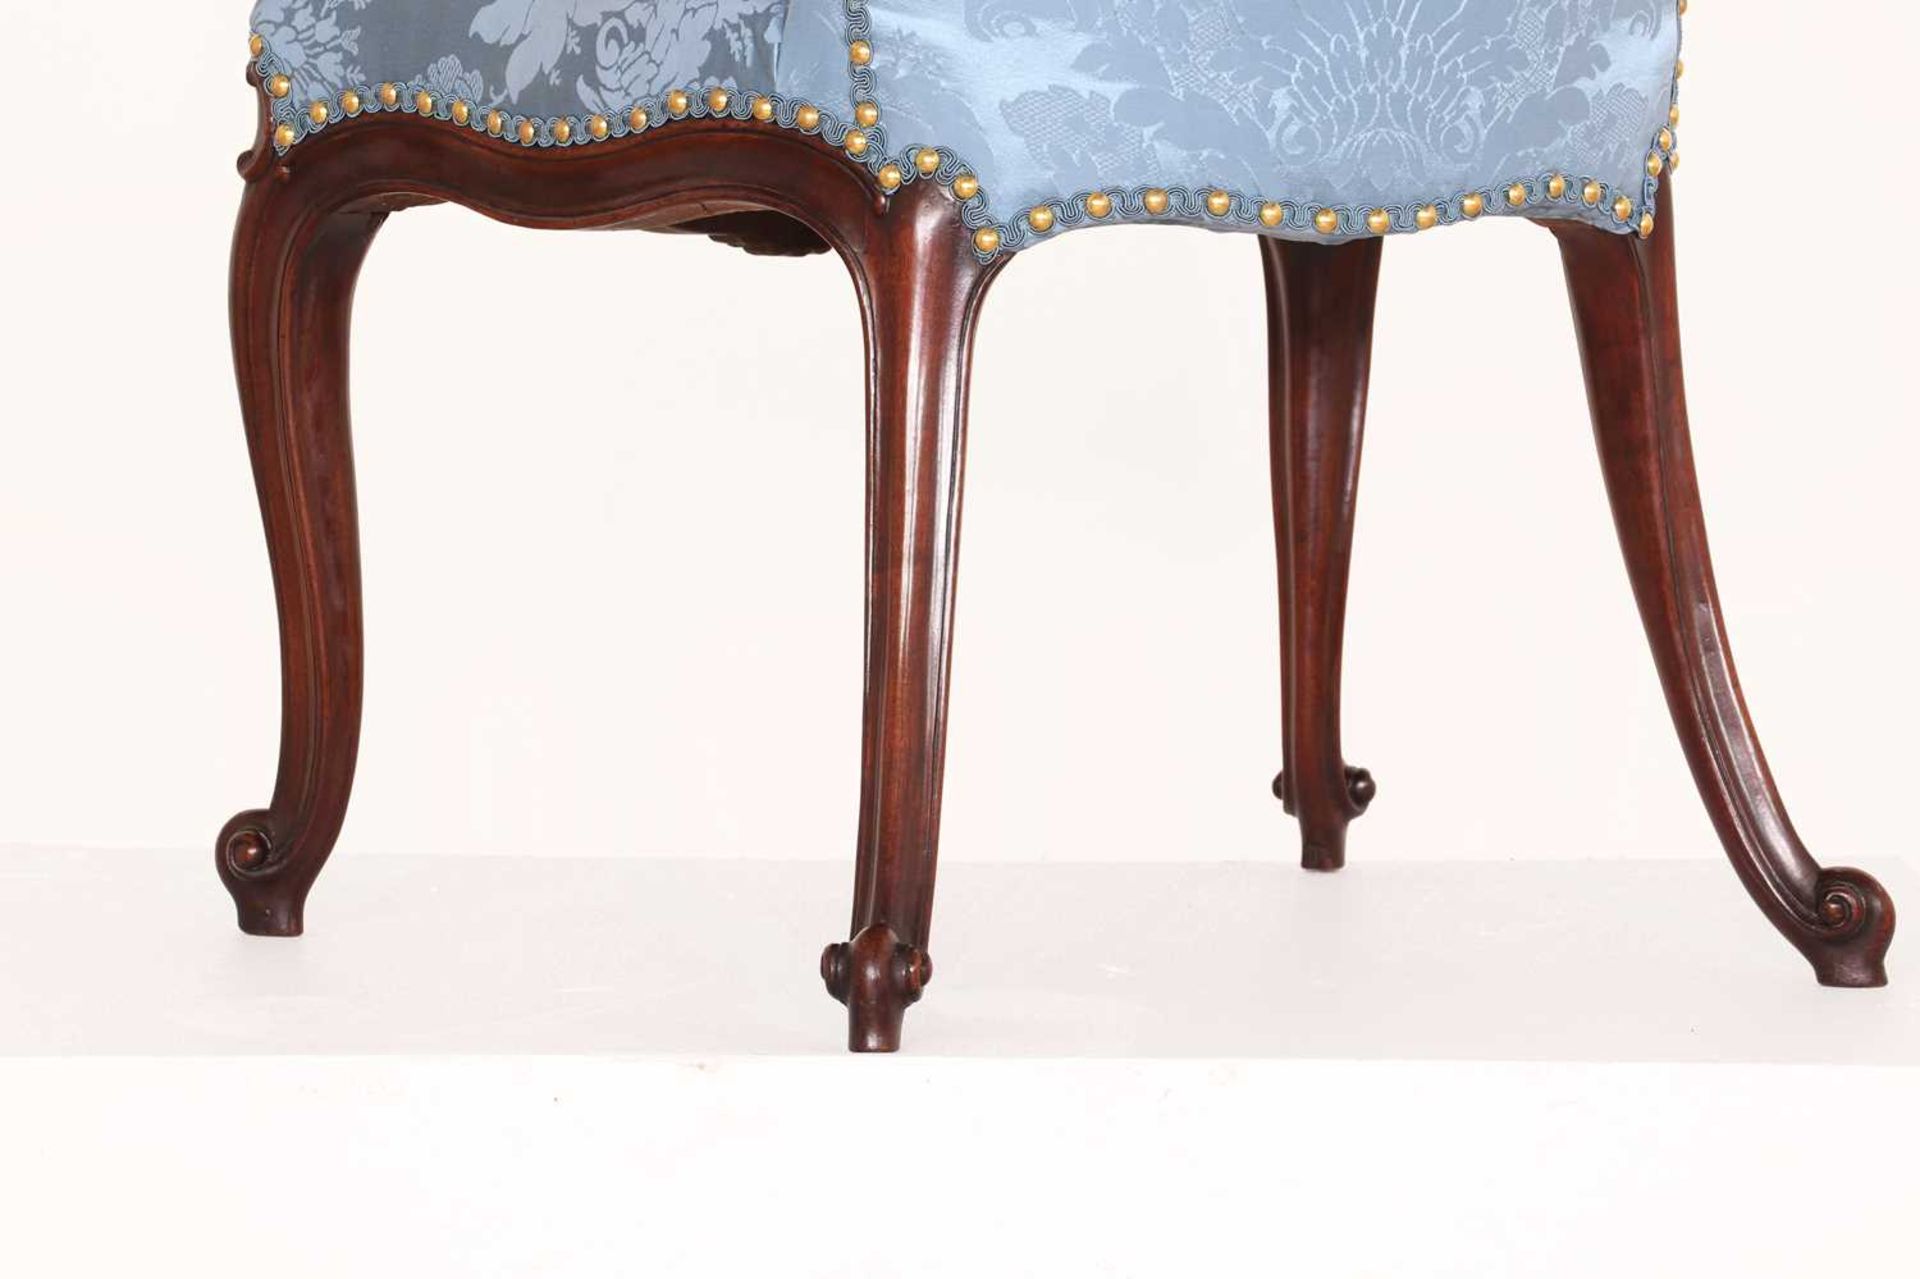 A George III mahogany side chair attributed to Thomas Chippendale - Image 11 of 53